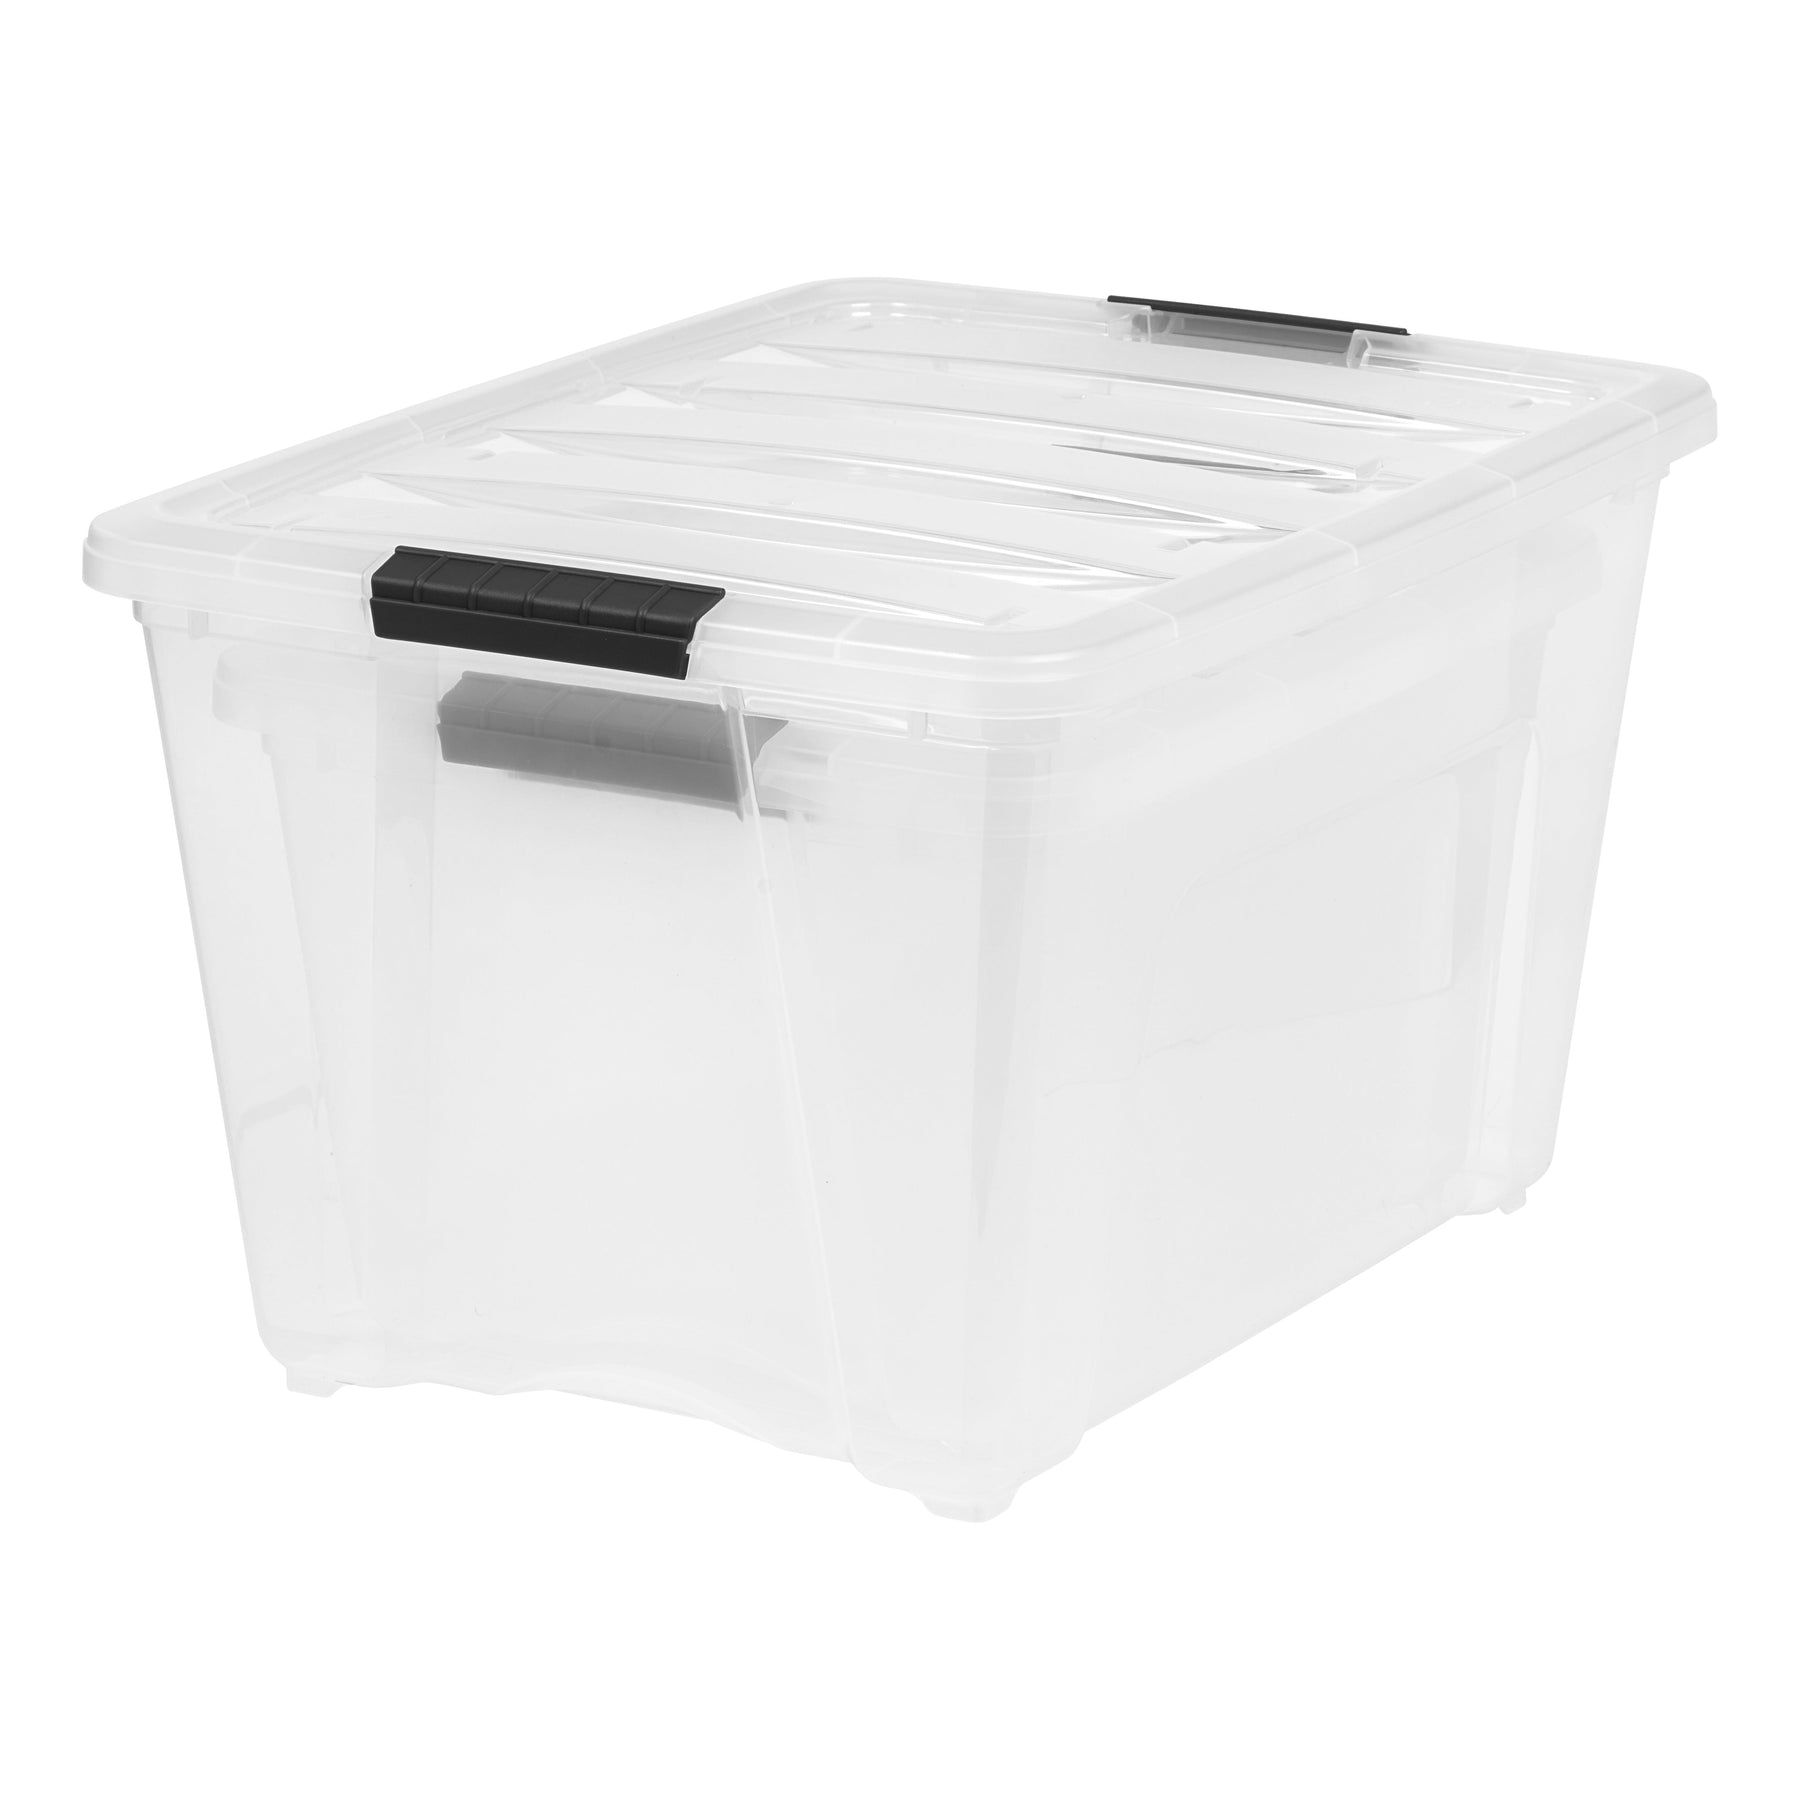 IRIS Clear Storage Bins 20ct ONLY $29! (Only $1.49 each)